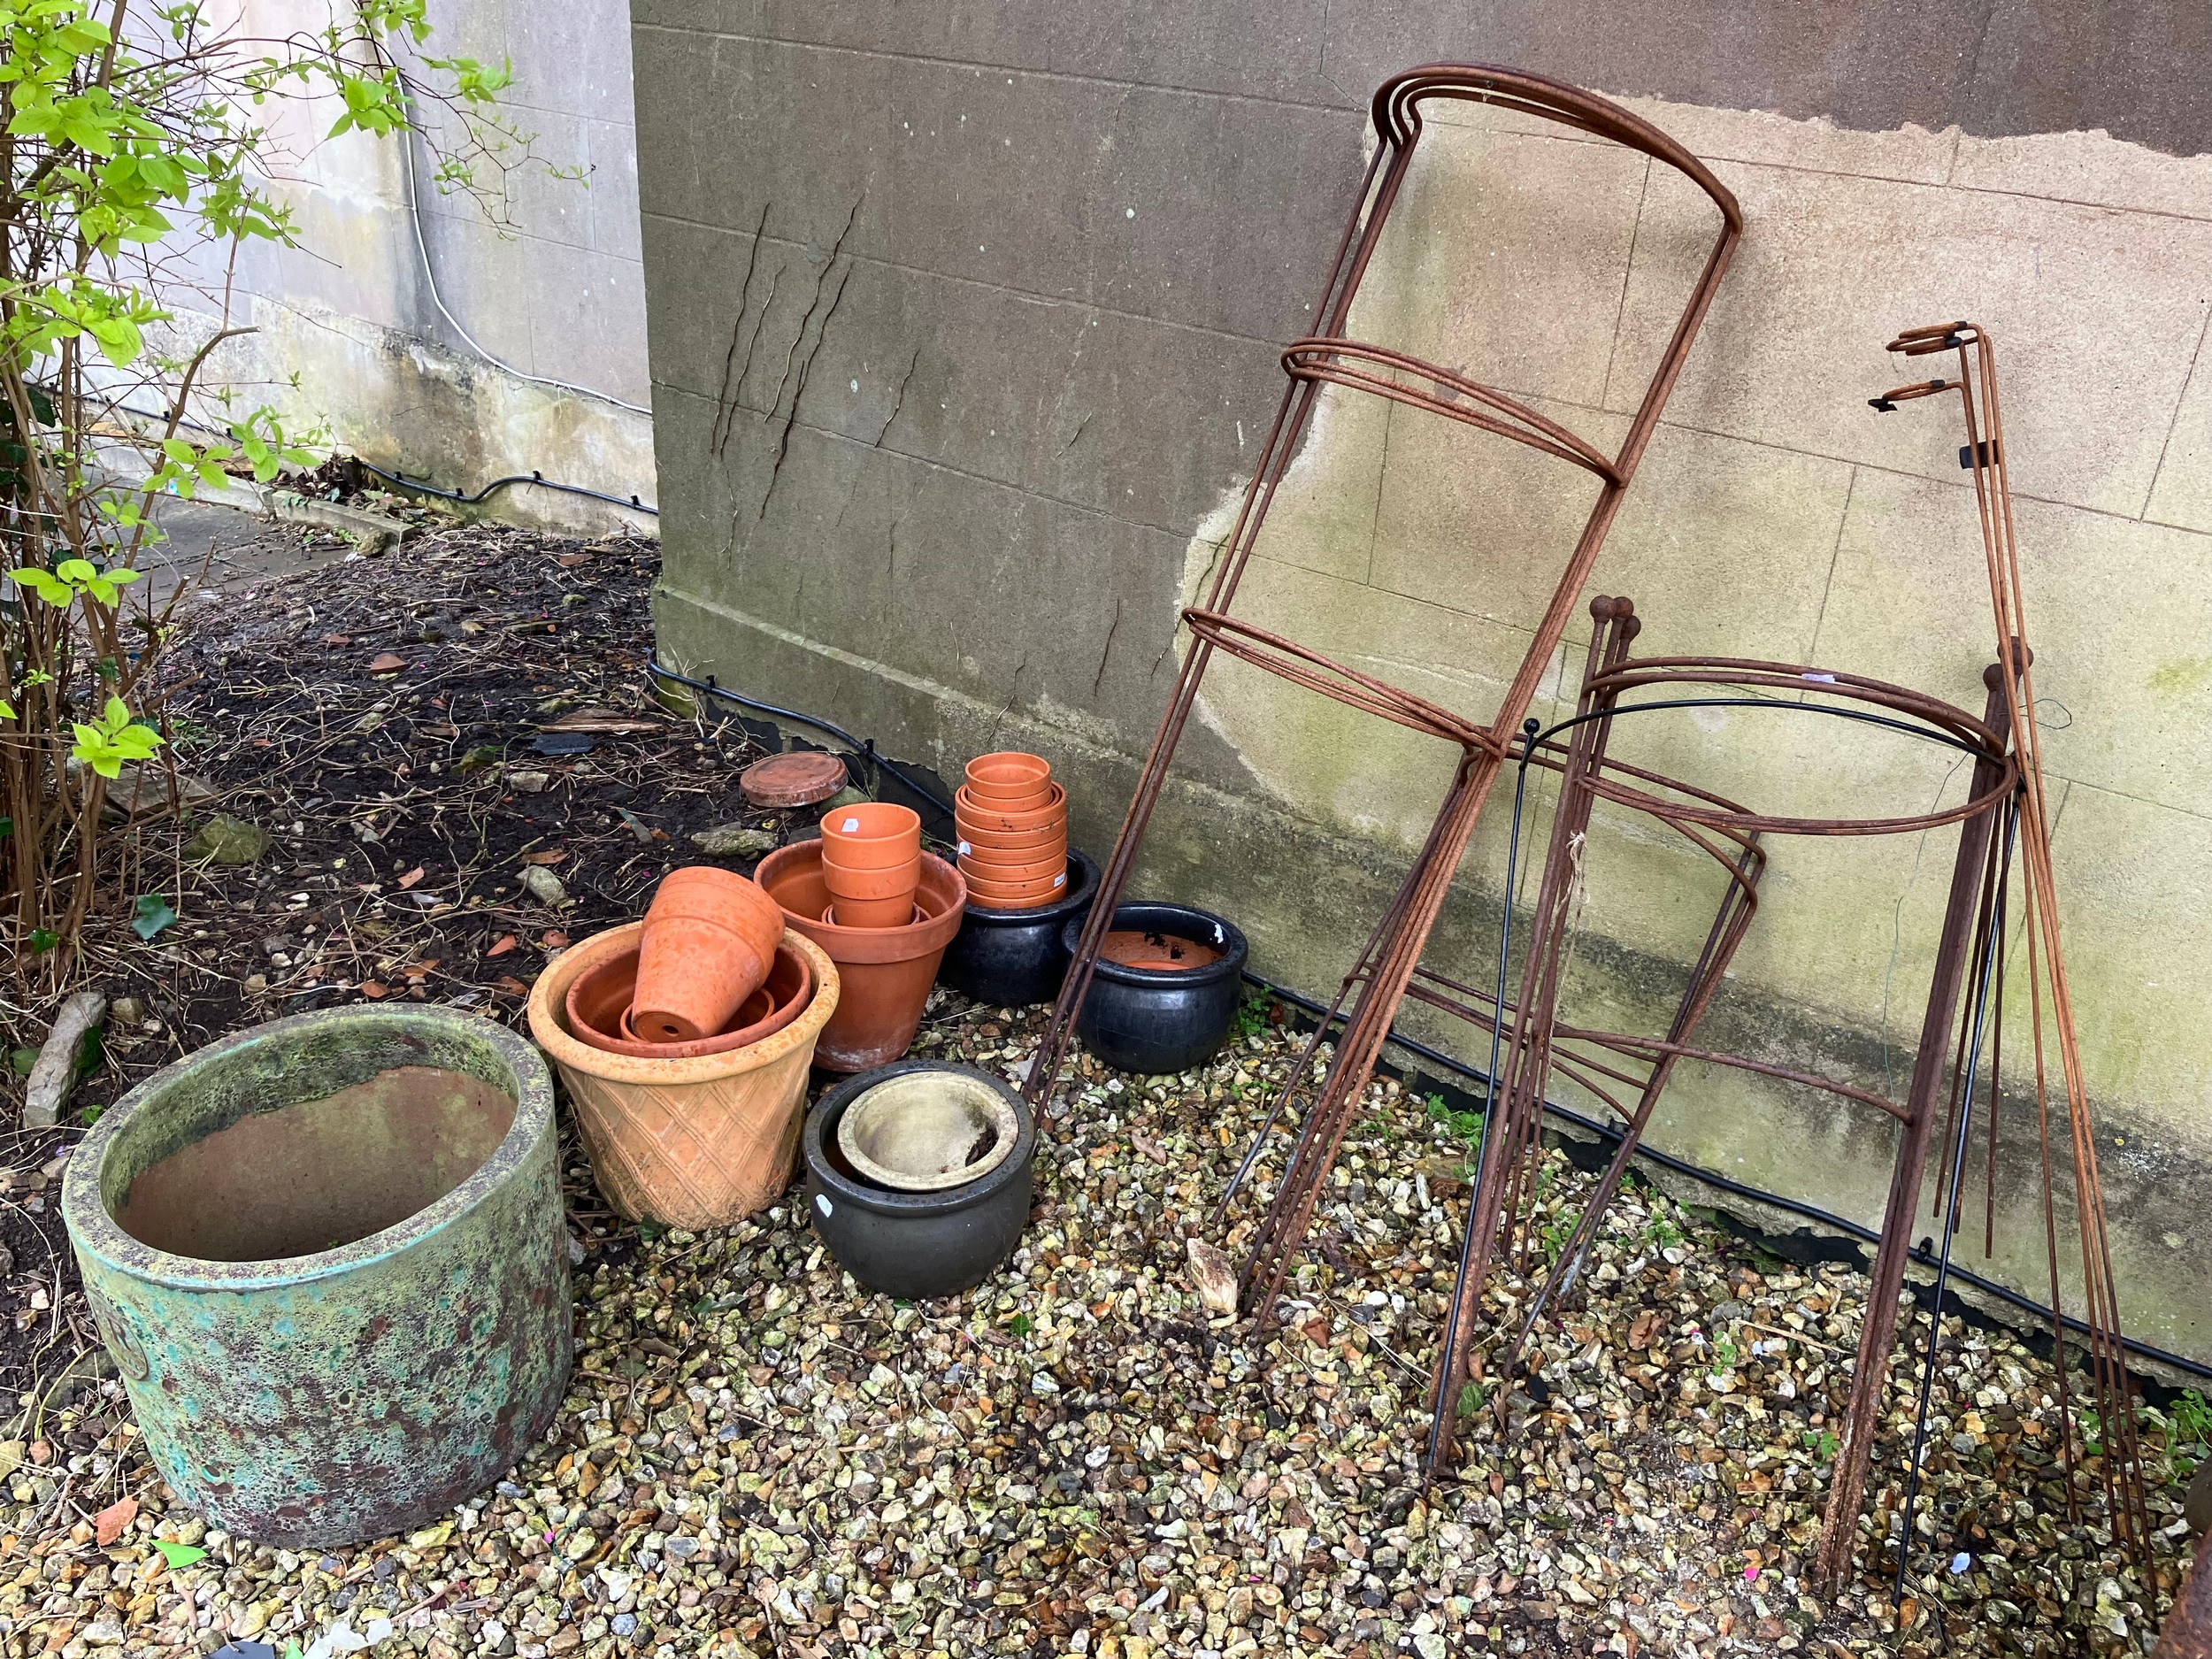 Assorted garden planters and plant pots, and assorted metal plant supports